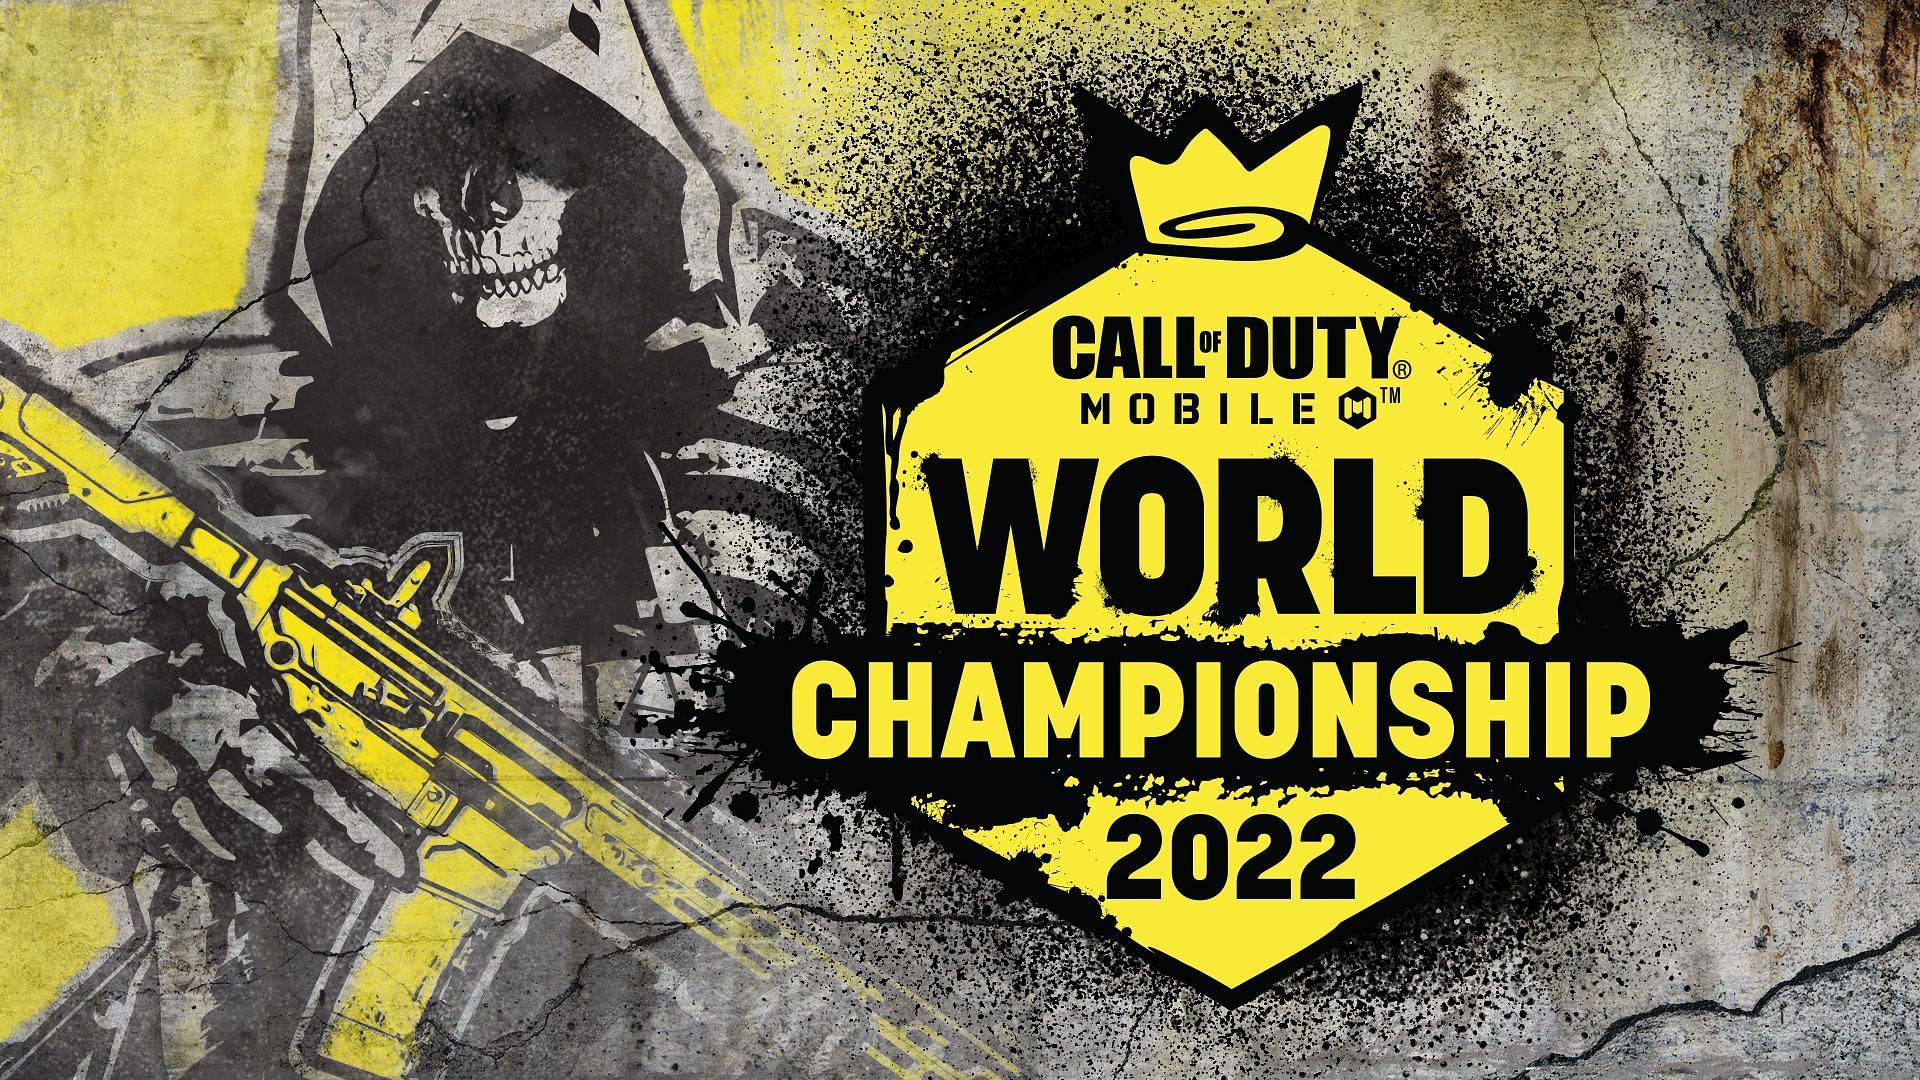 The COD Mobile 2022 World Championship has been officially announced, and players can unlock weapon skins and more by playing the tourney (Image via Activision)